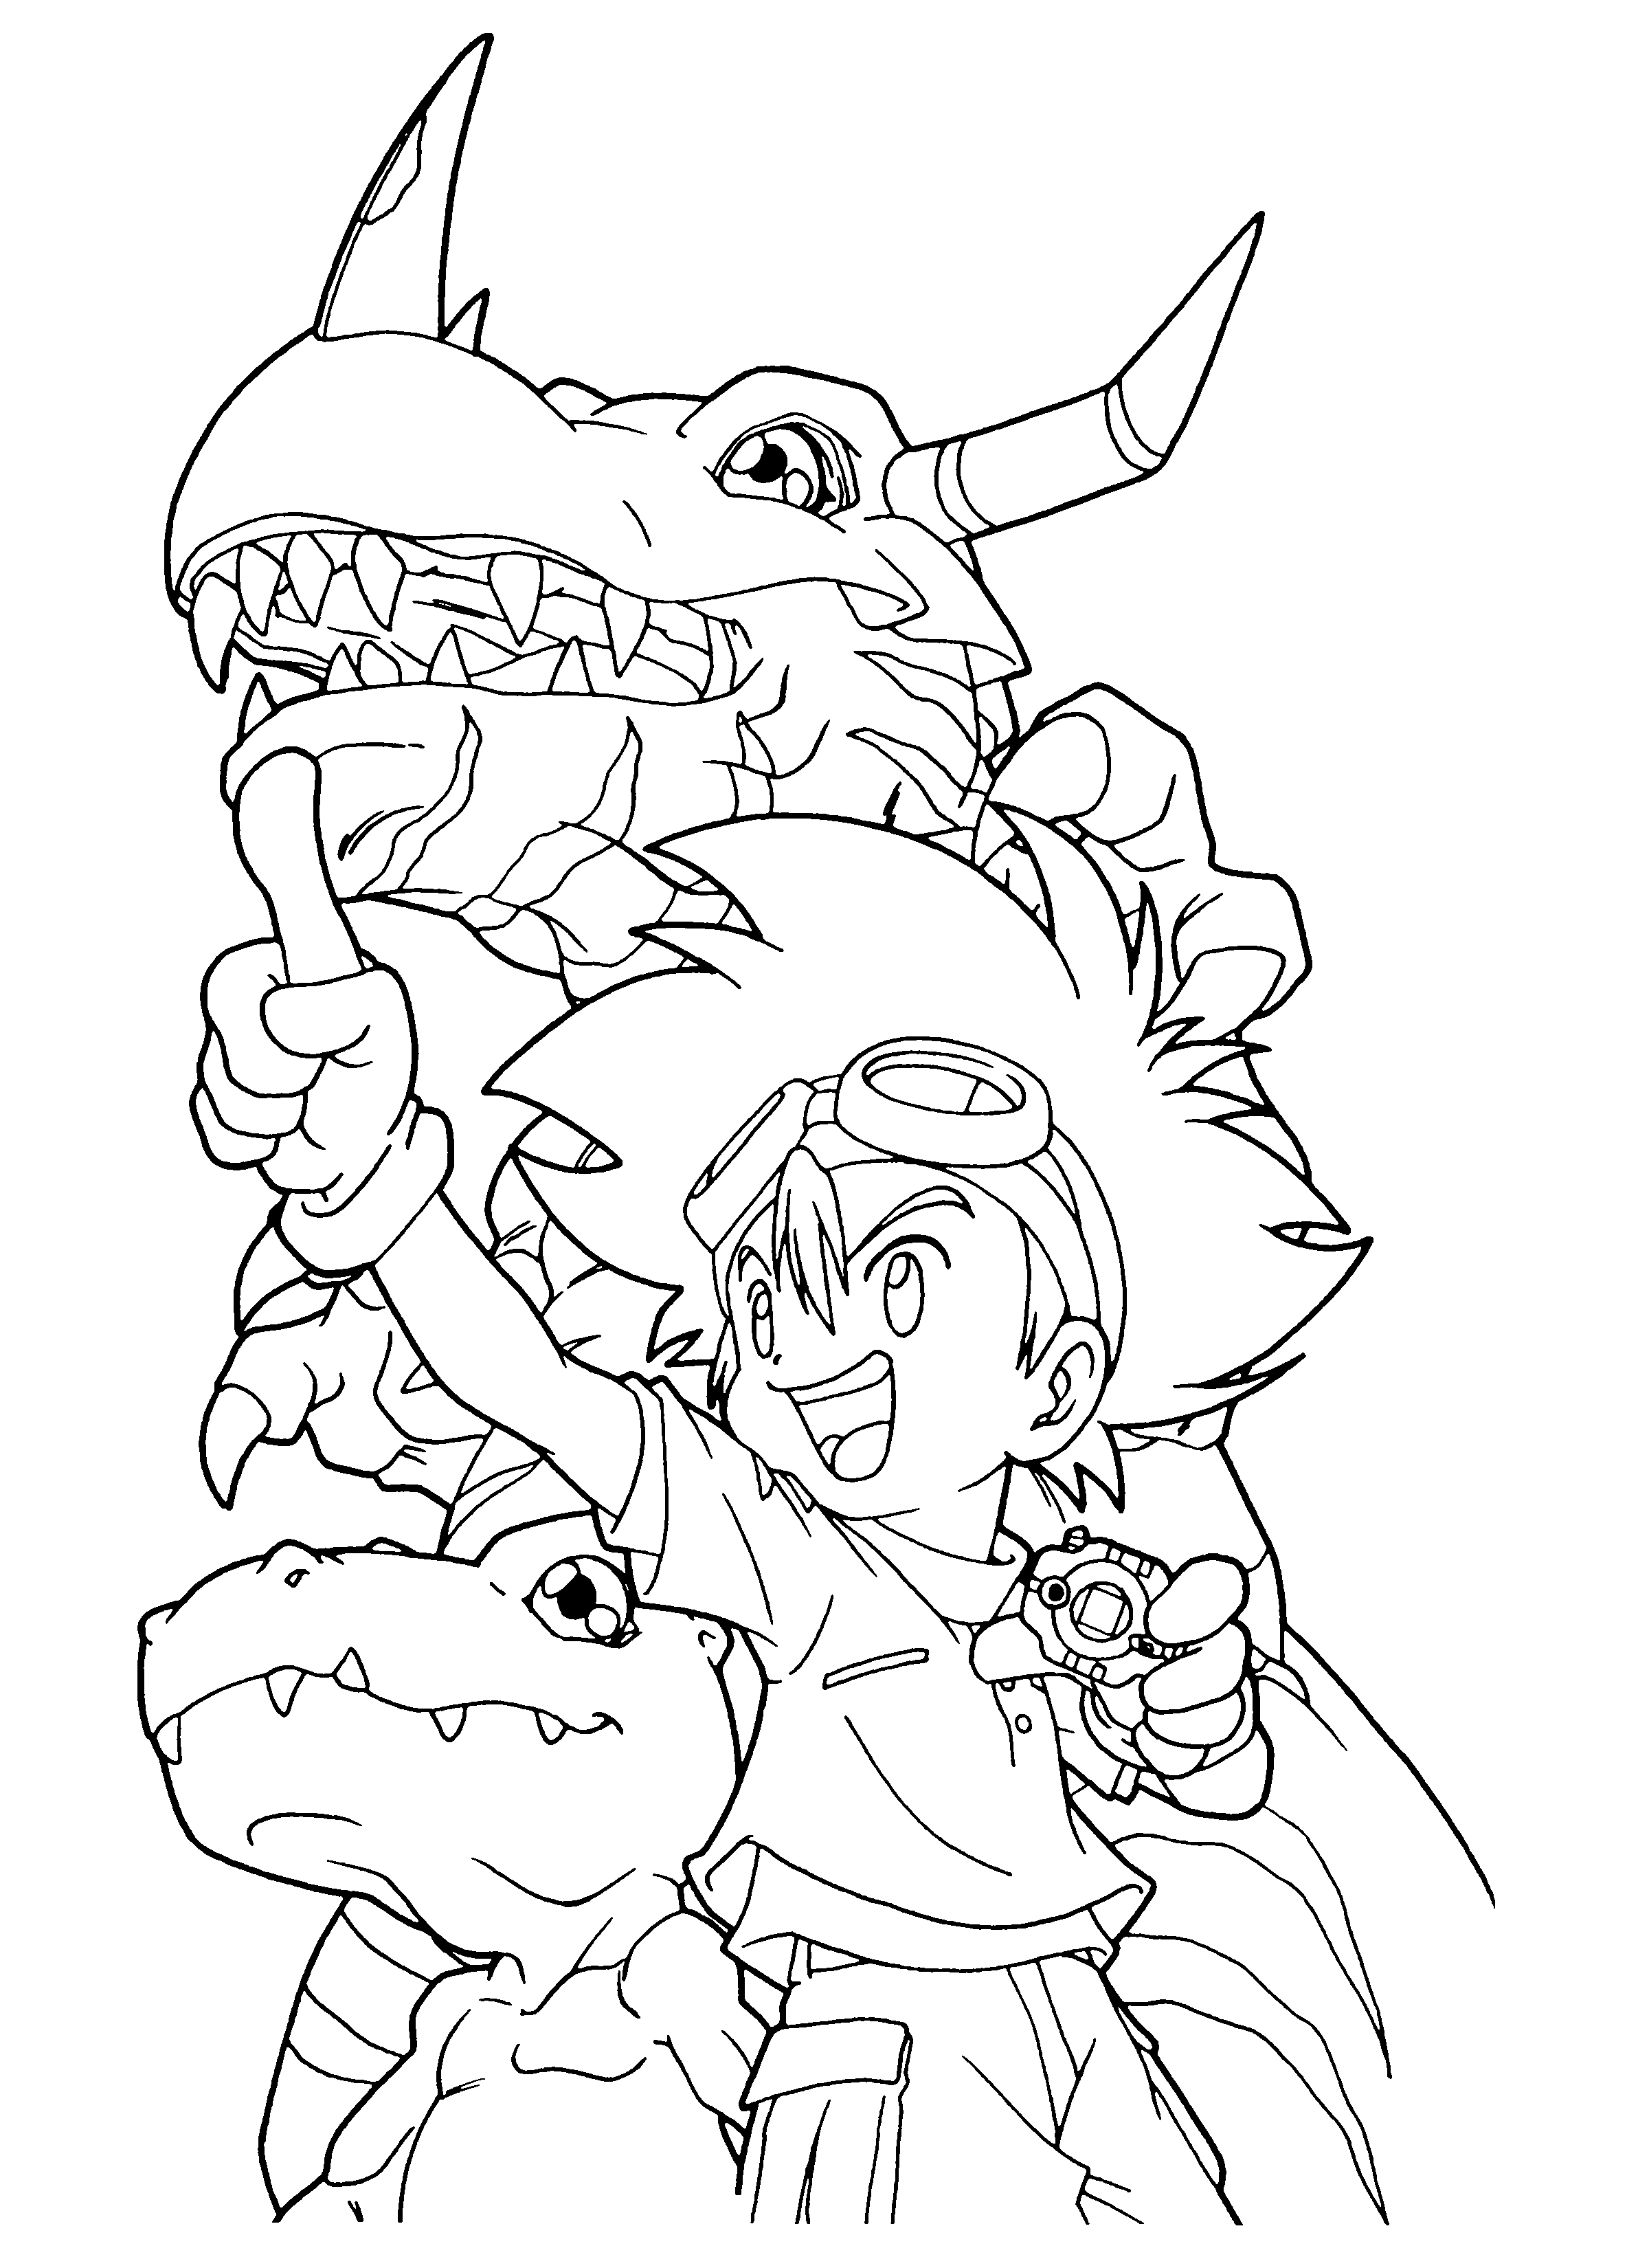 Free Printable Digimon Coloring Pages For Kids Coloring Wallpapers Download Free Images Wallpaper [coloring436.blogspot.com]